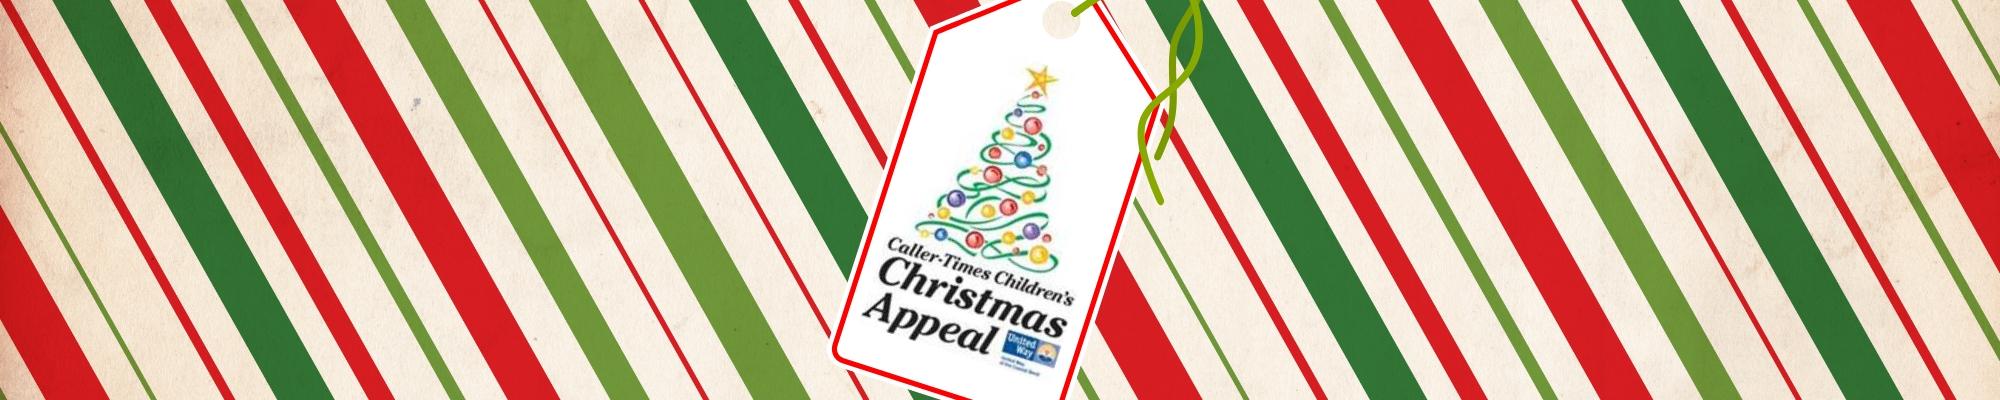 Donate to the Children's Christmas Appeal